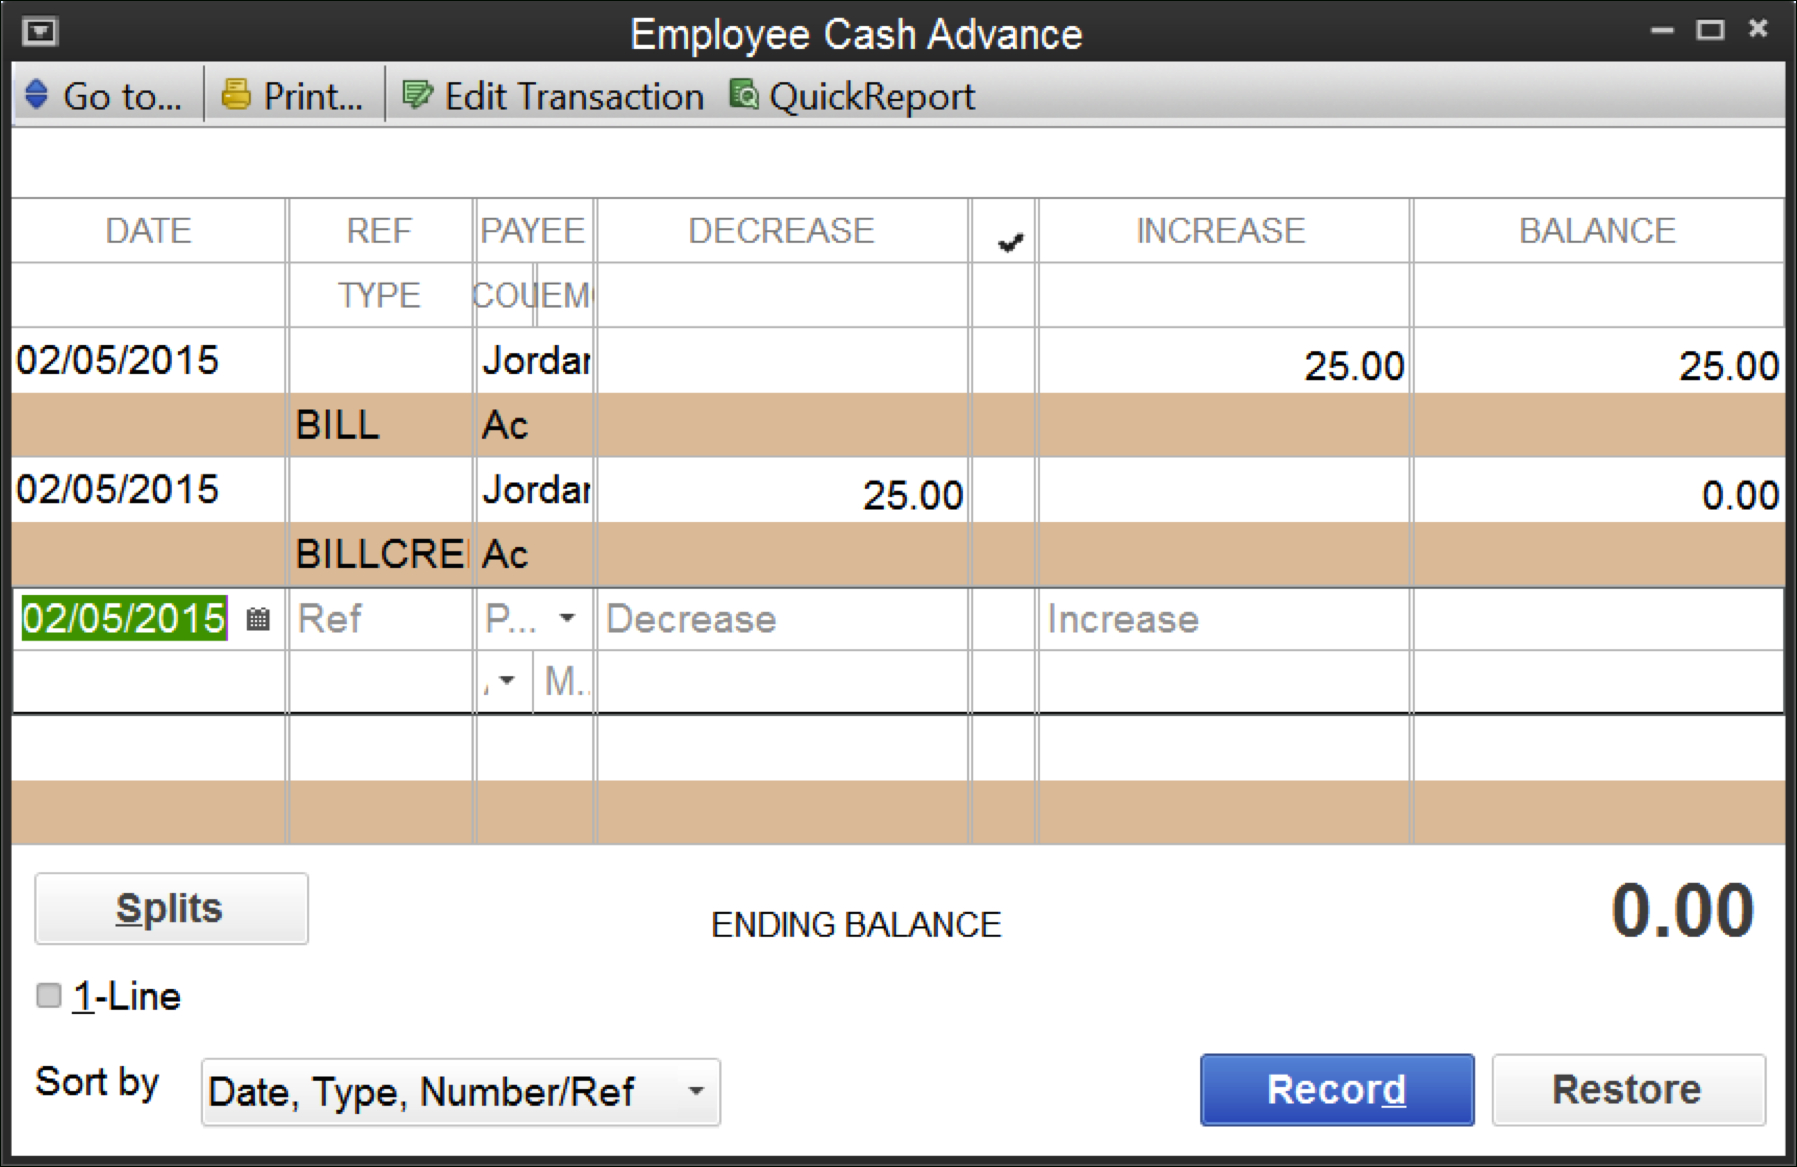 Gas Mileage Expense Report Template ] – Template Employee With Regard To Gas Mileage Expense Report Template